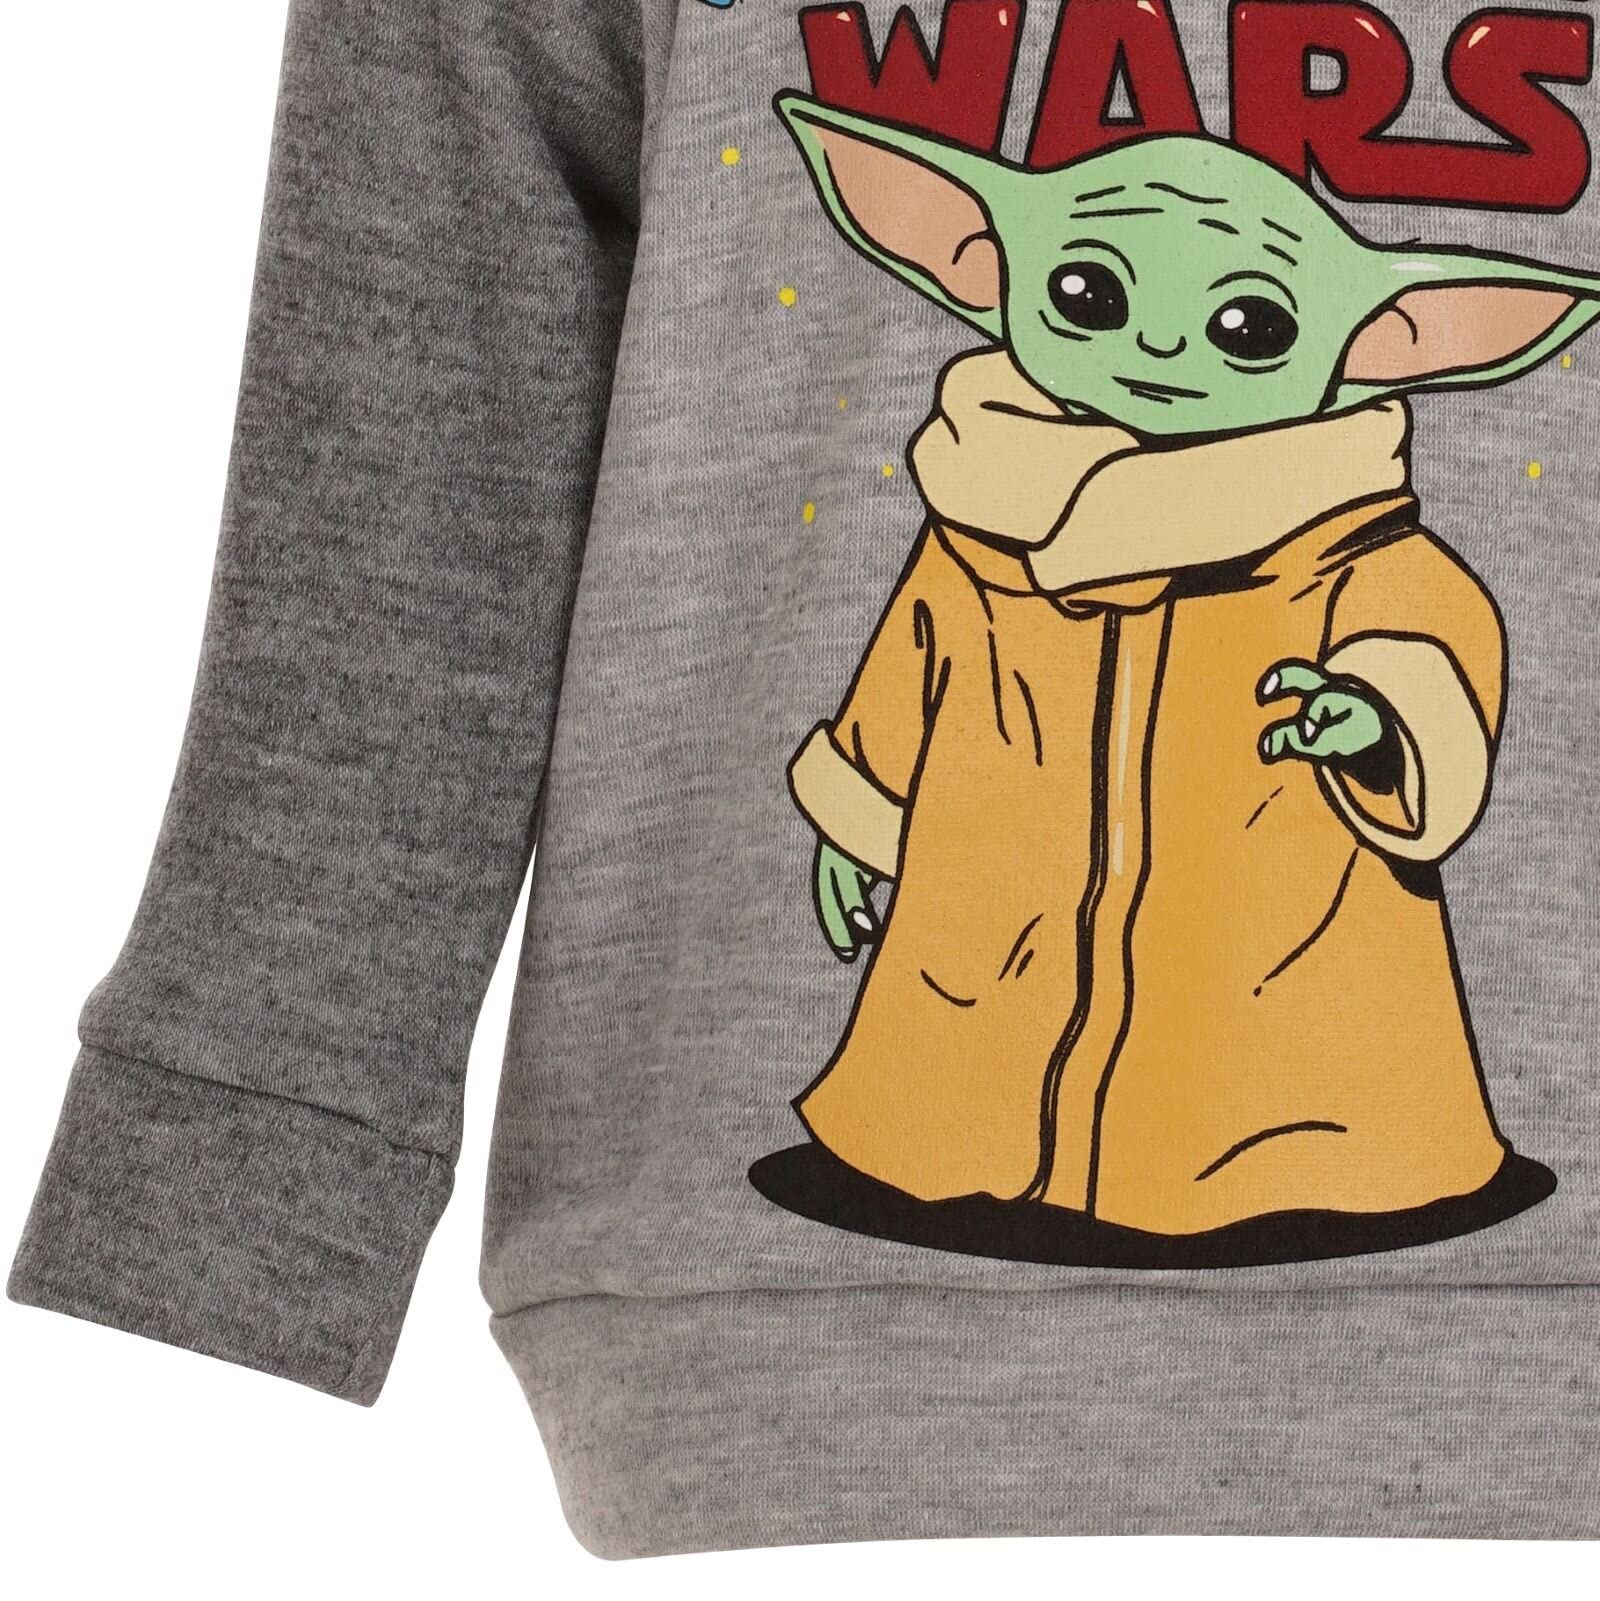 STAR WARS The Child Pullover Hoodie and Pants Outfit Set Infant to Big Kid